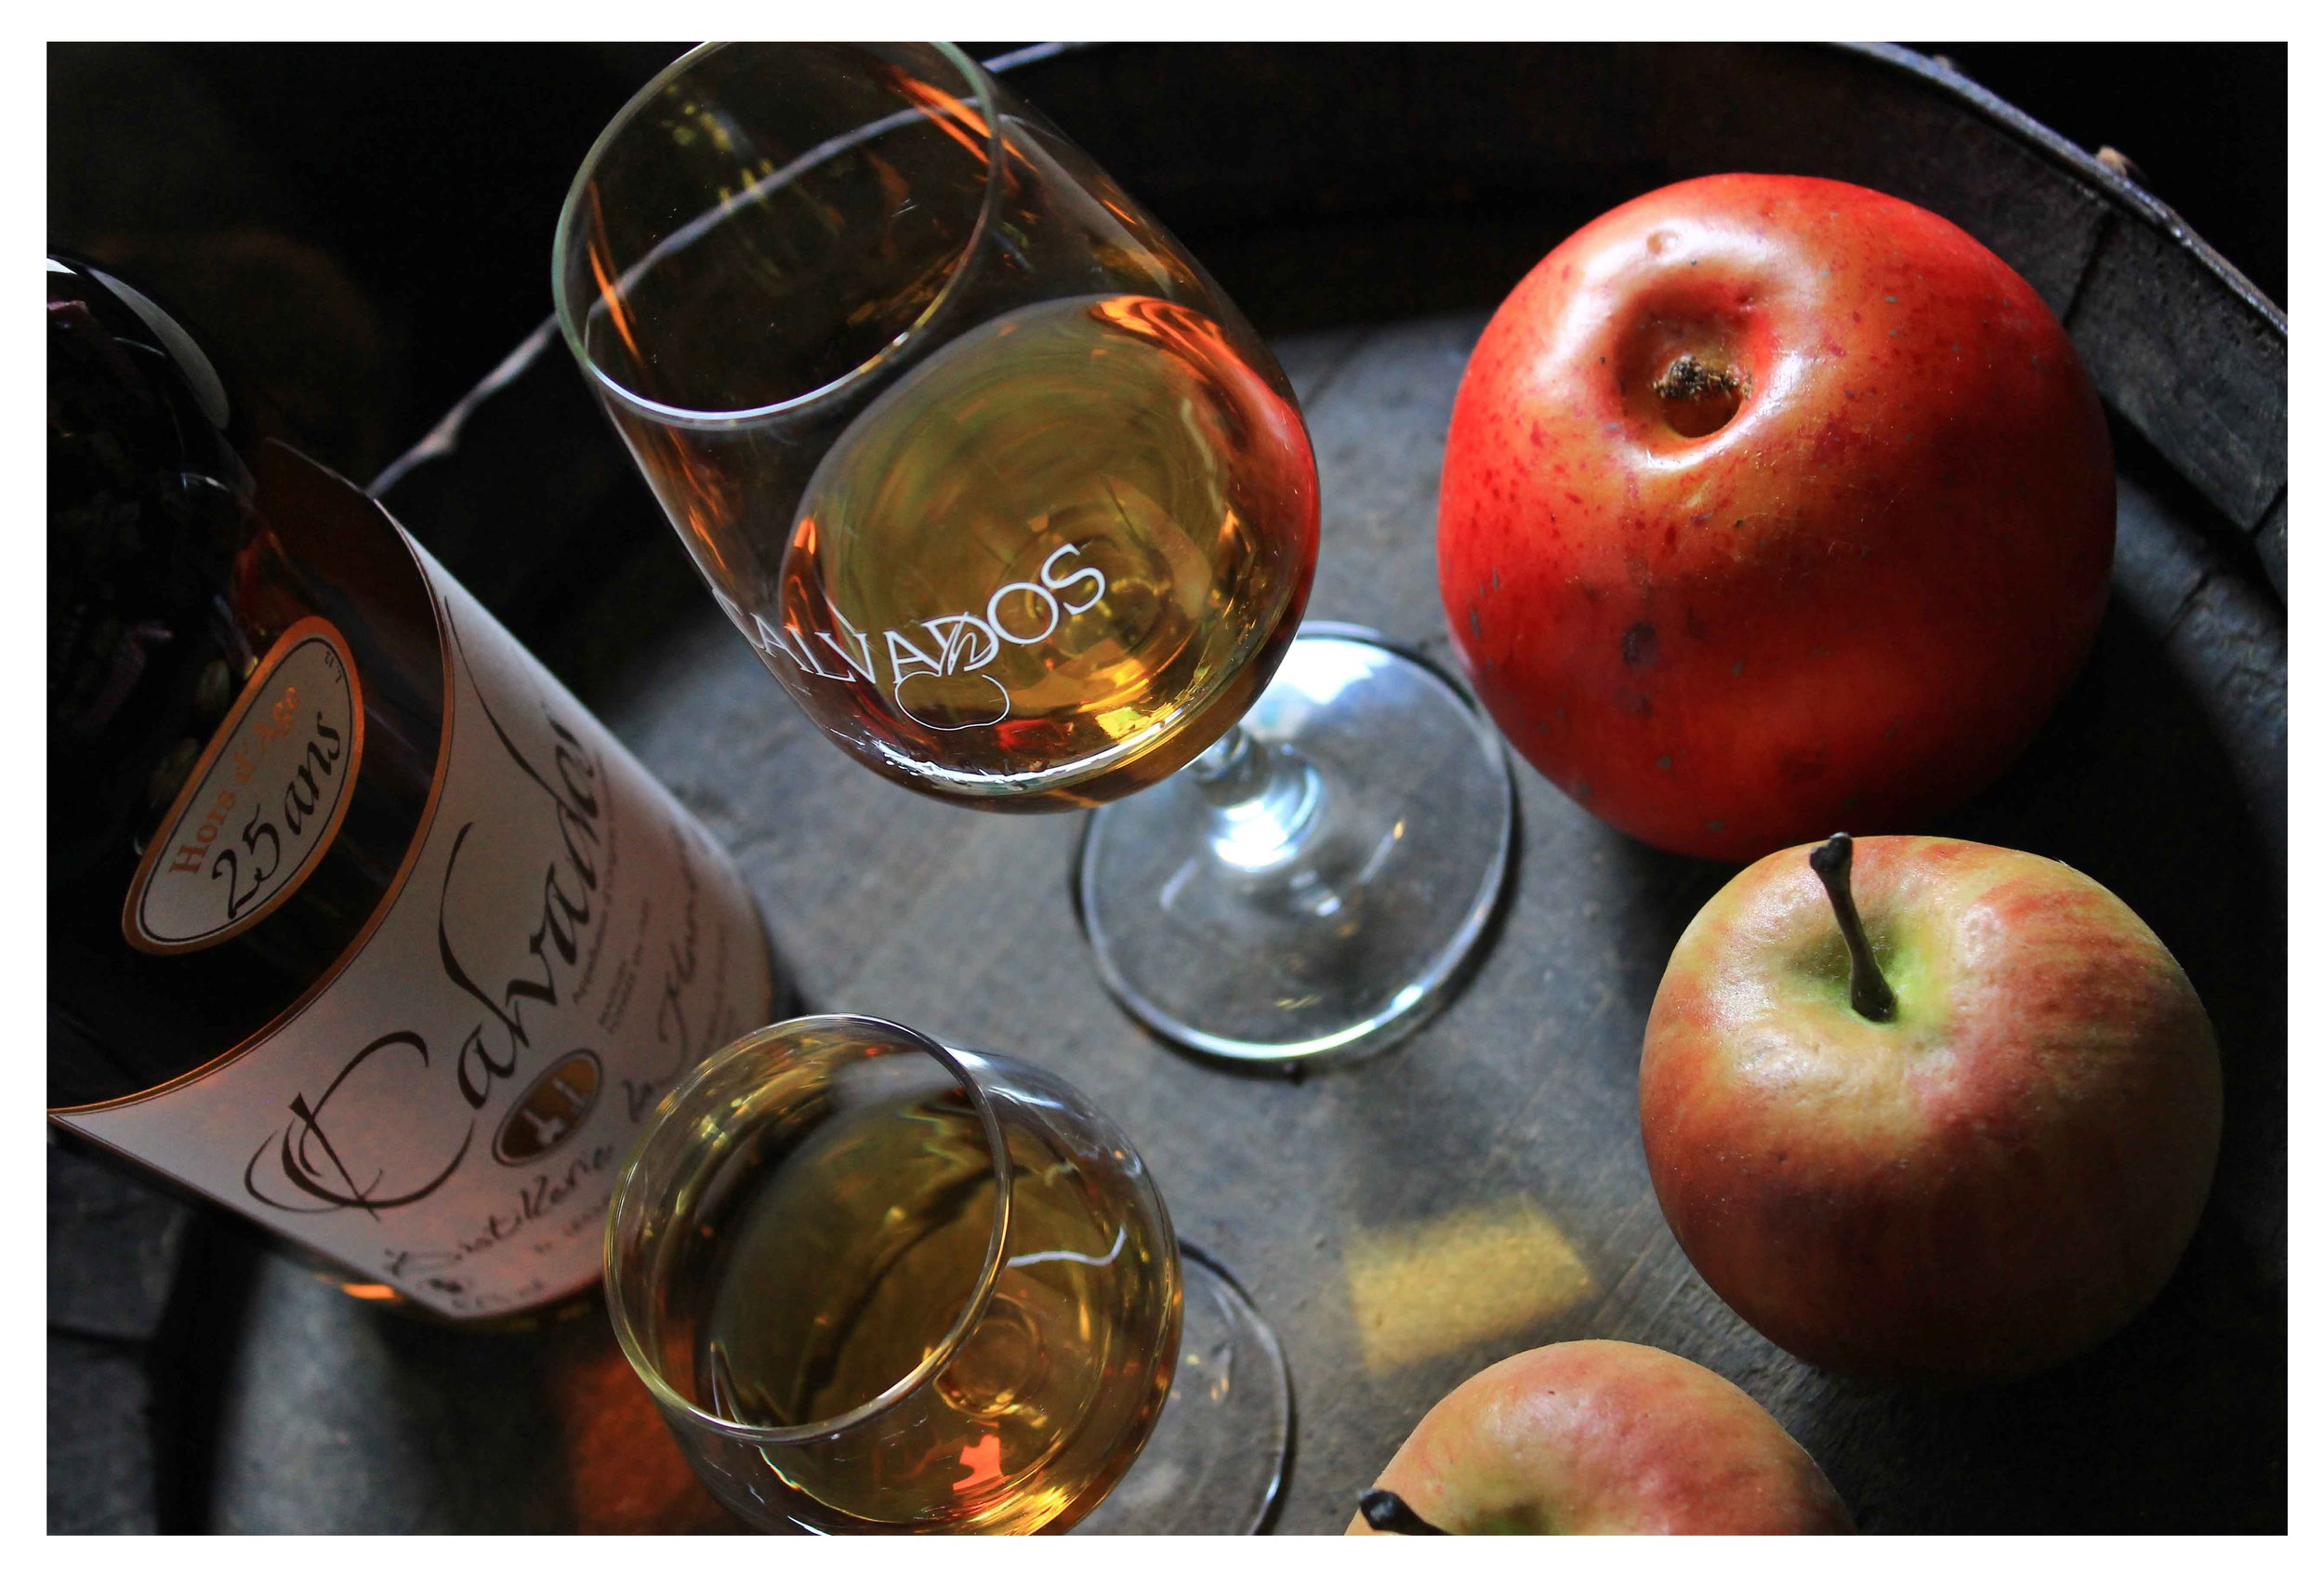 A glass of Calvados on a tray next to apples and the open bottle.